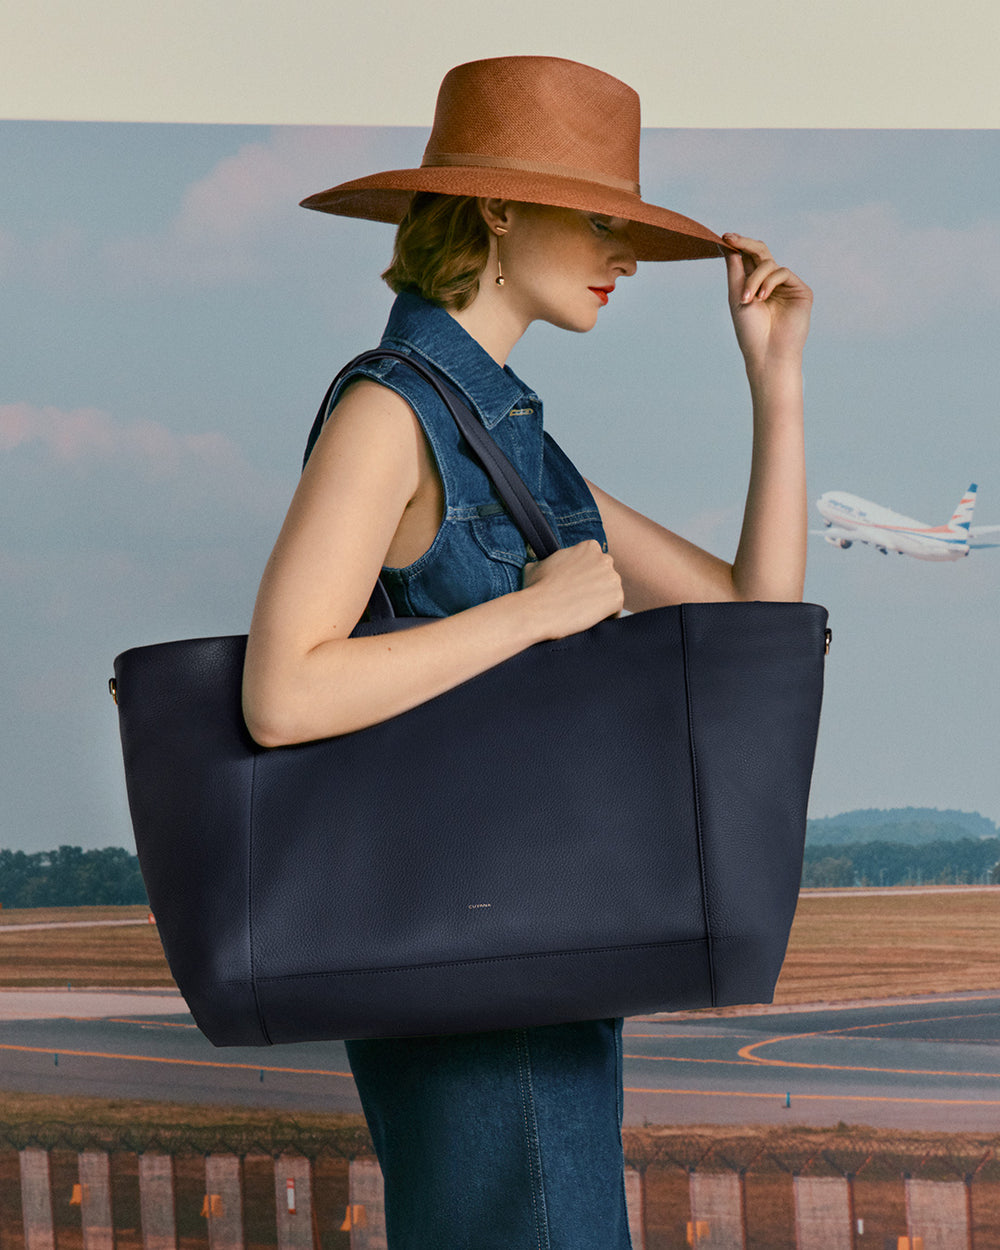 Woman holding large bag and adjusting wide-brimmed hat with airplane in background.